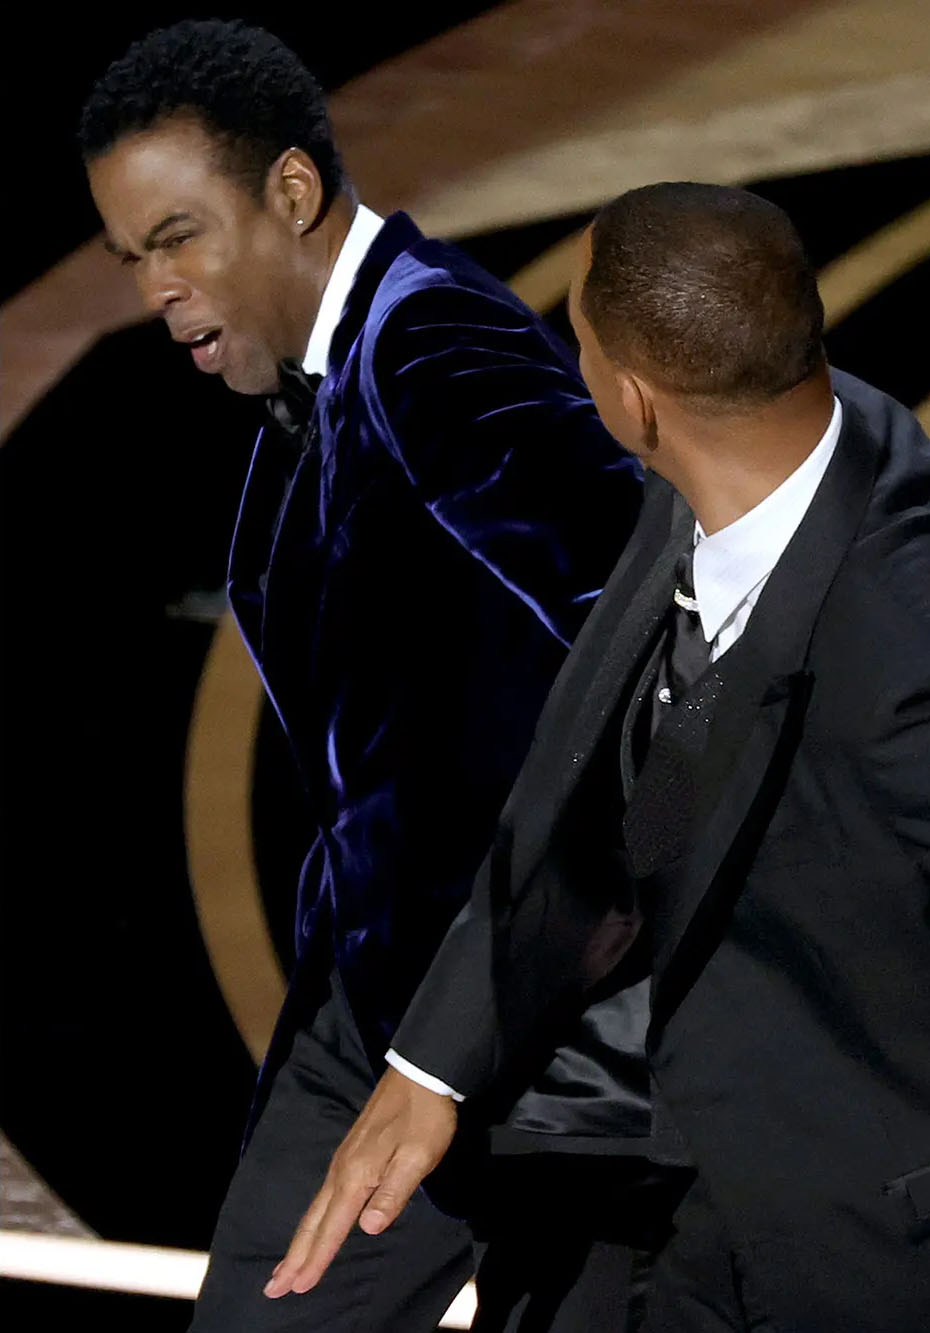 Will Smith slapping Chris Rock at the Academy Awards on March 27, 2022.